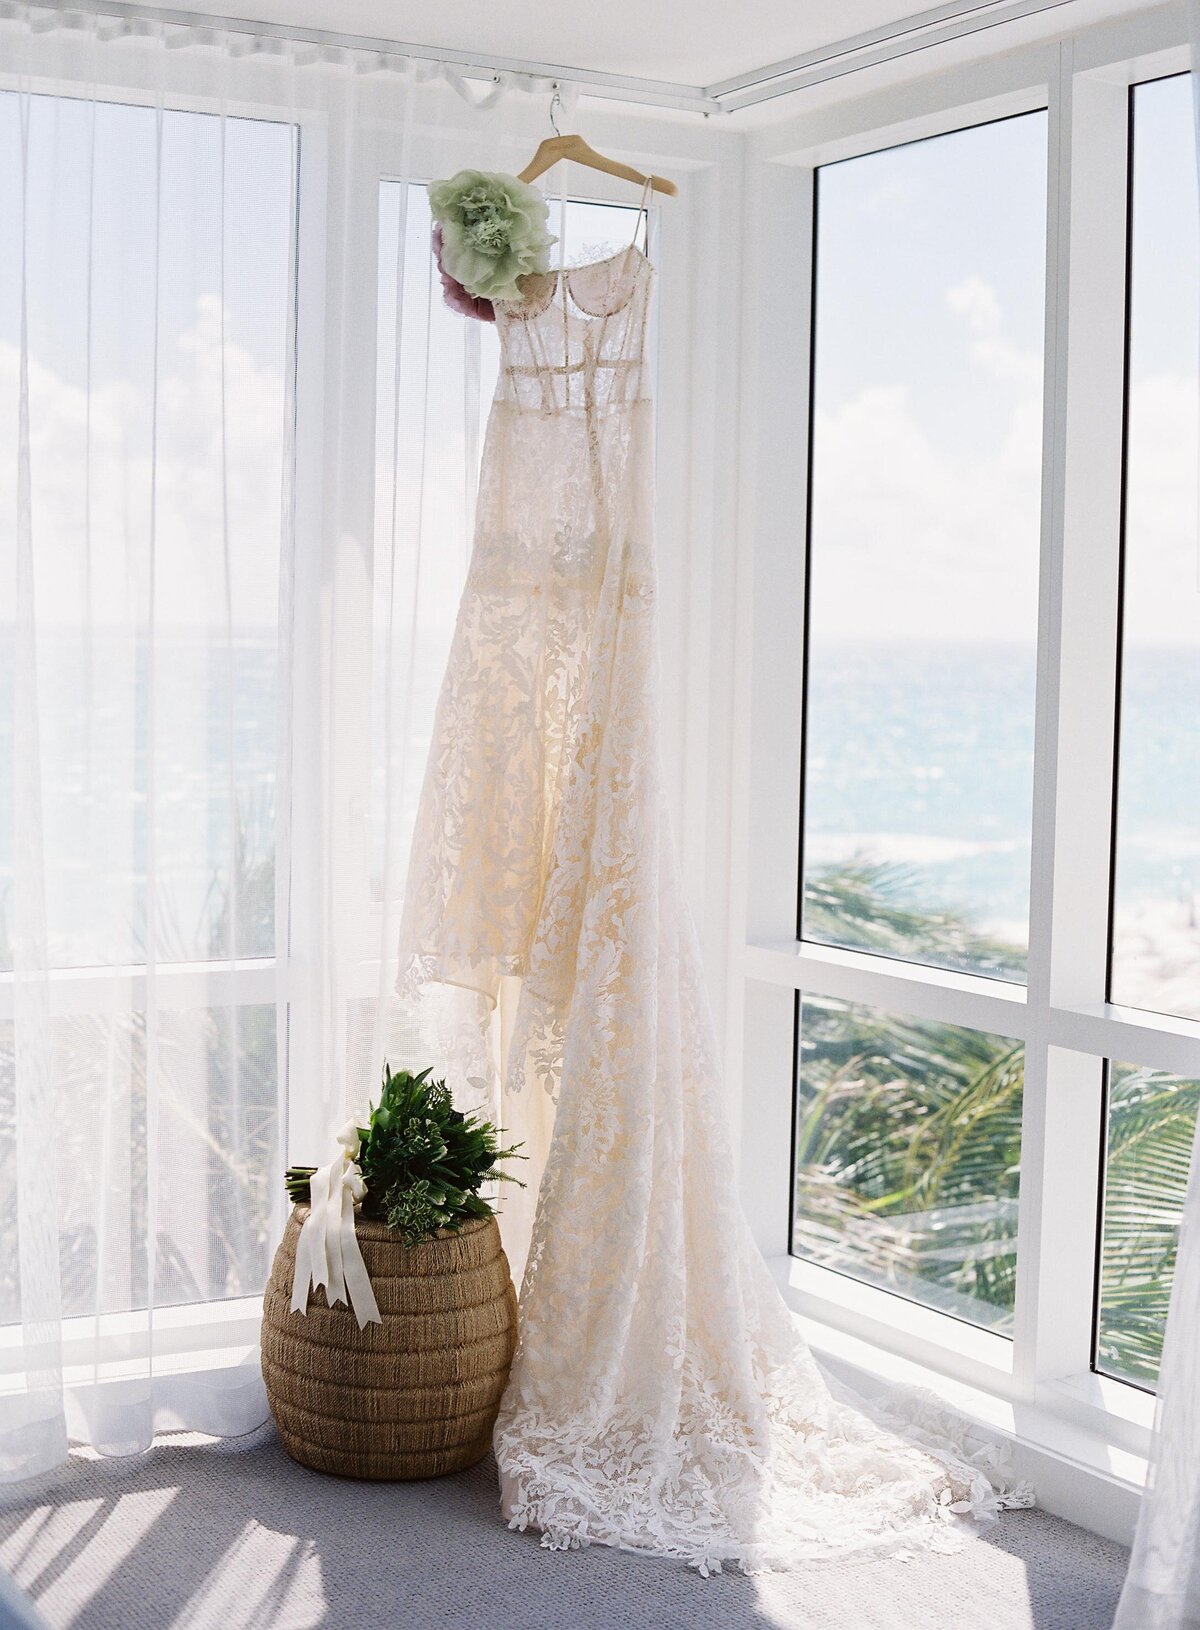 Wedding Gown Hanging by Window